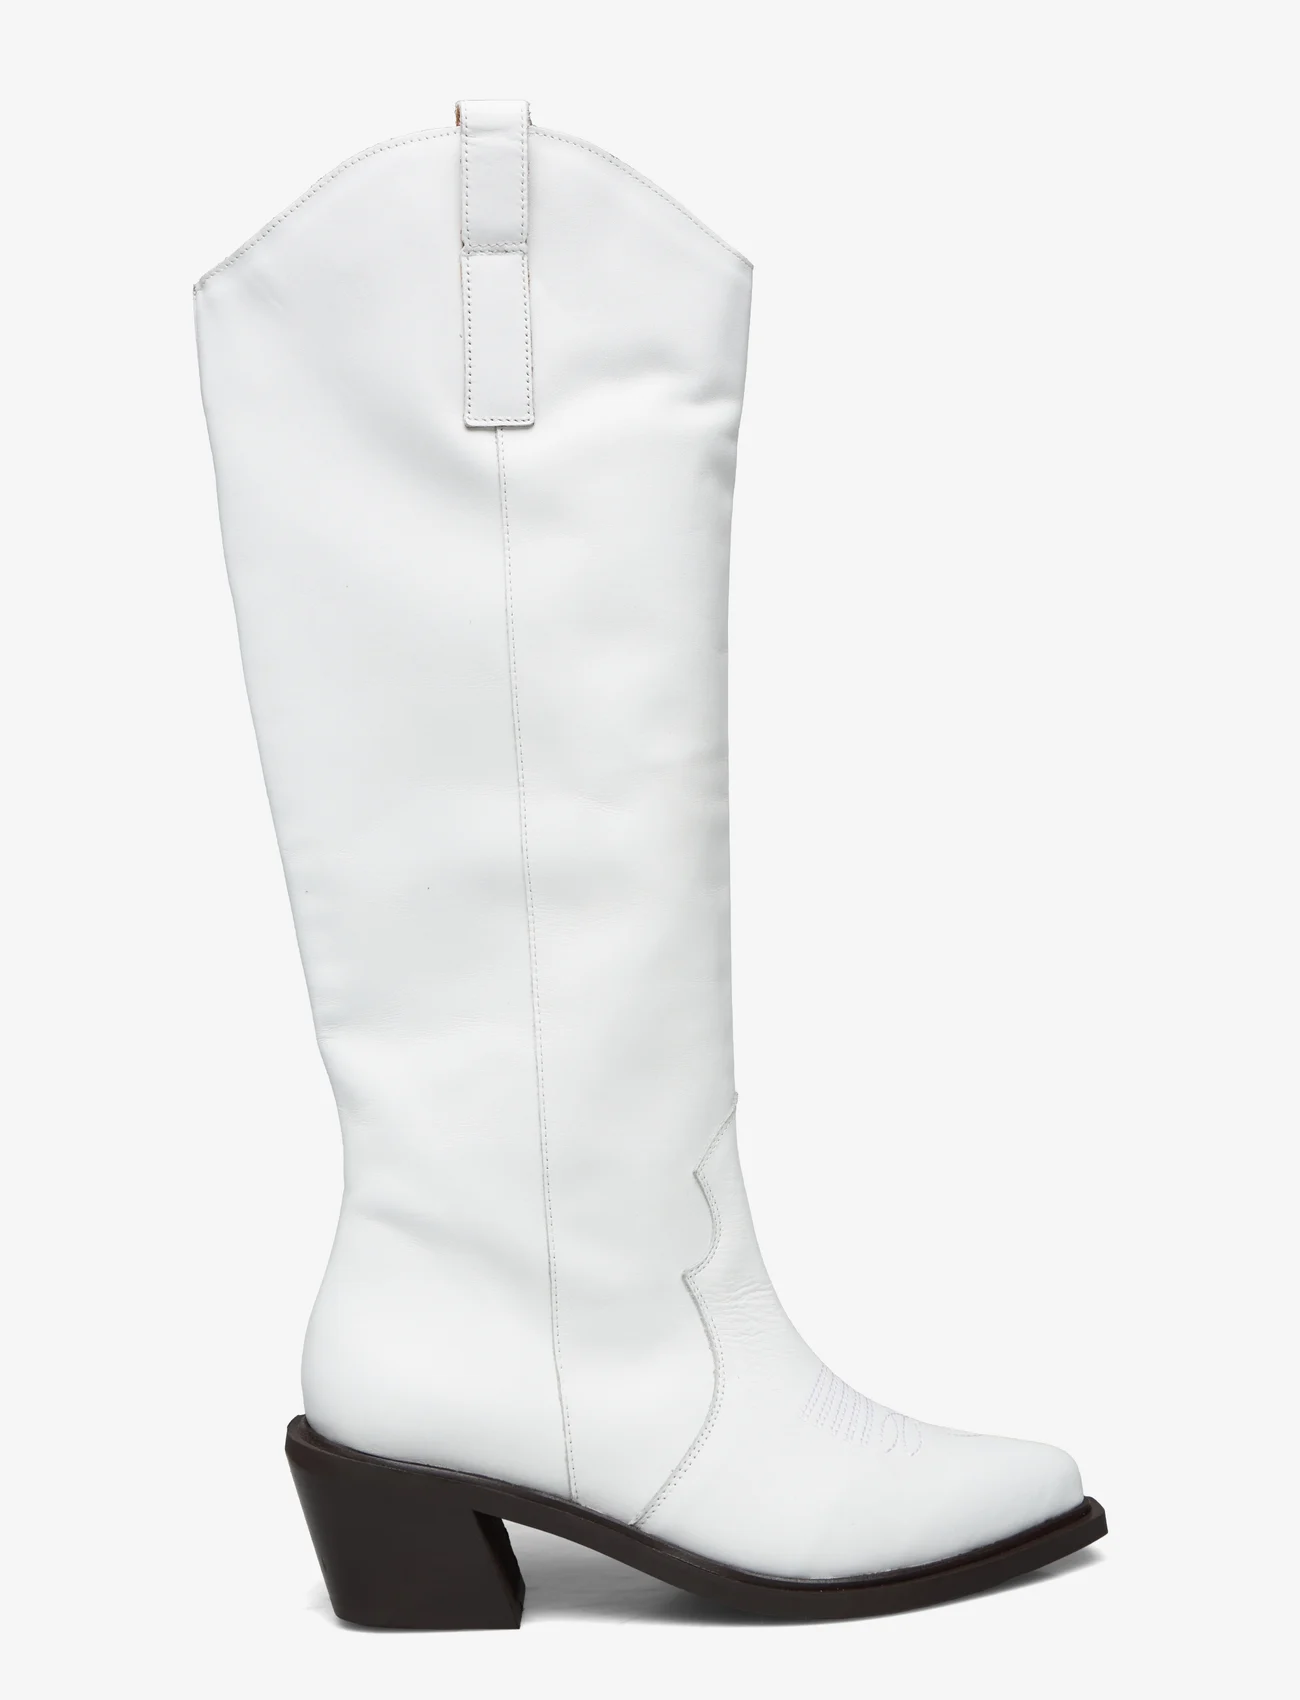 ALOHAS - Mount Bright White Leather Boots - cowboy boots - white - 1